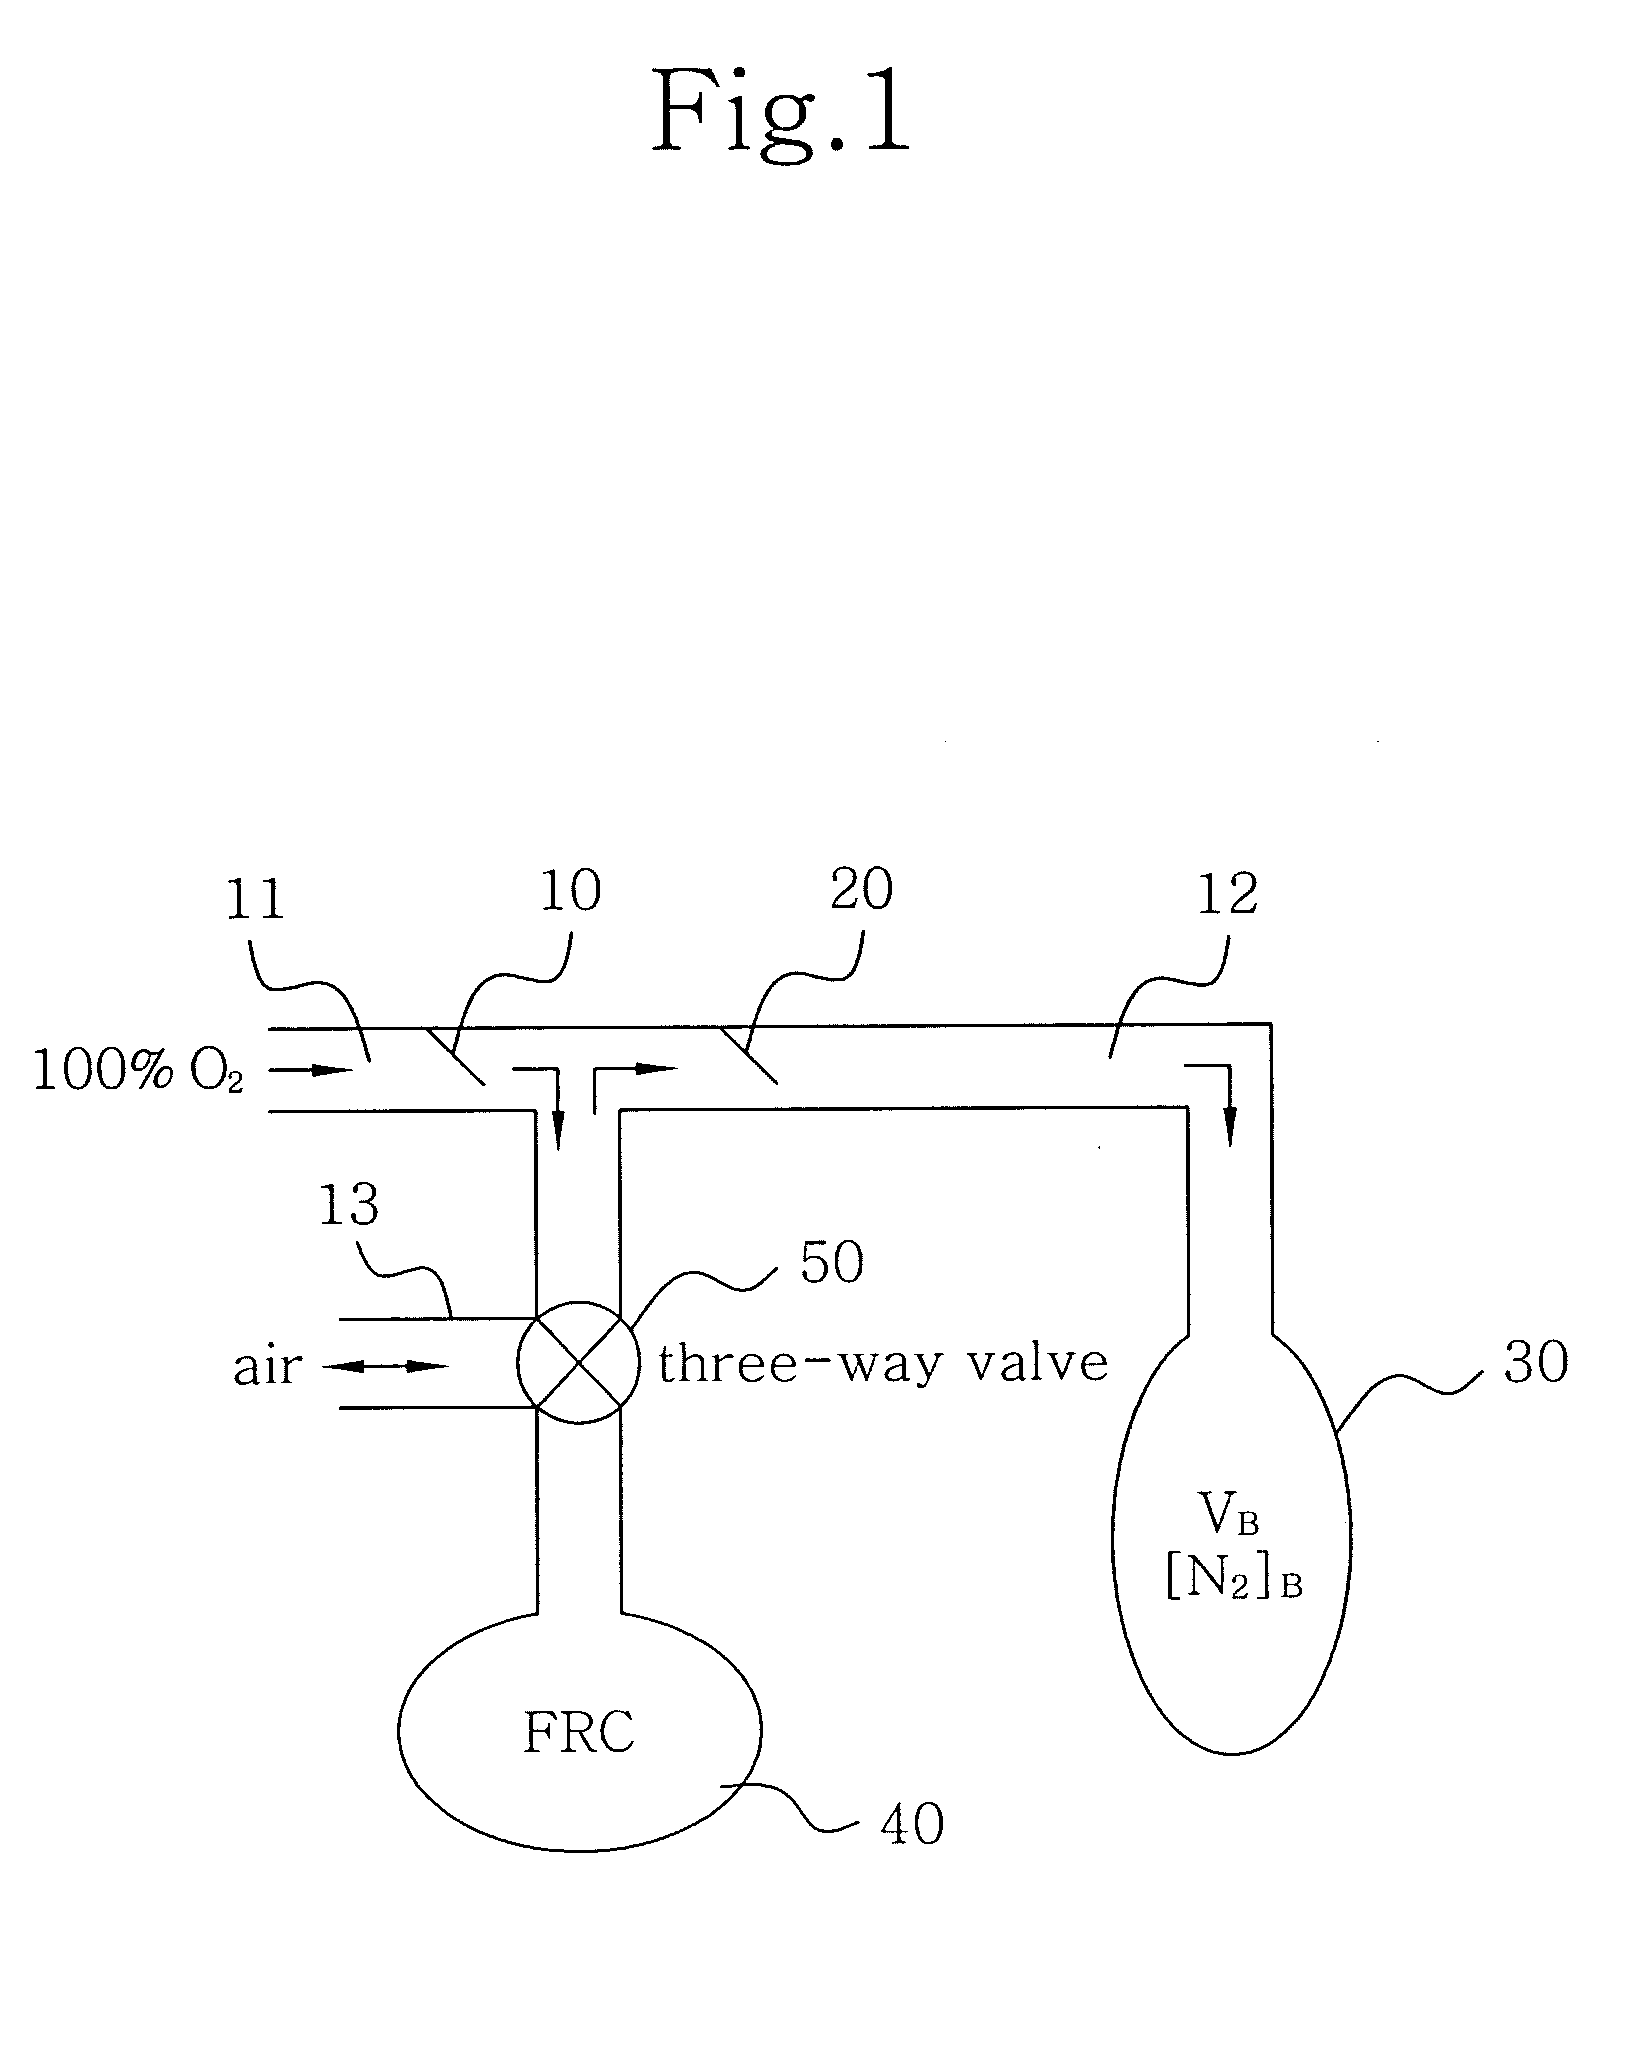 Method of measuring absolute lung volume based on O2/CO2 gas analysis